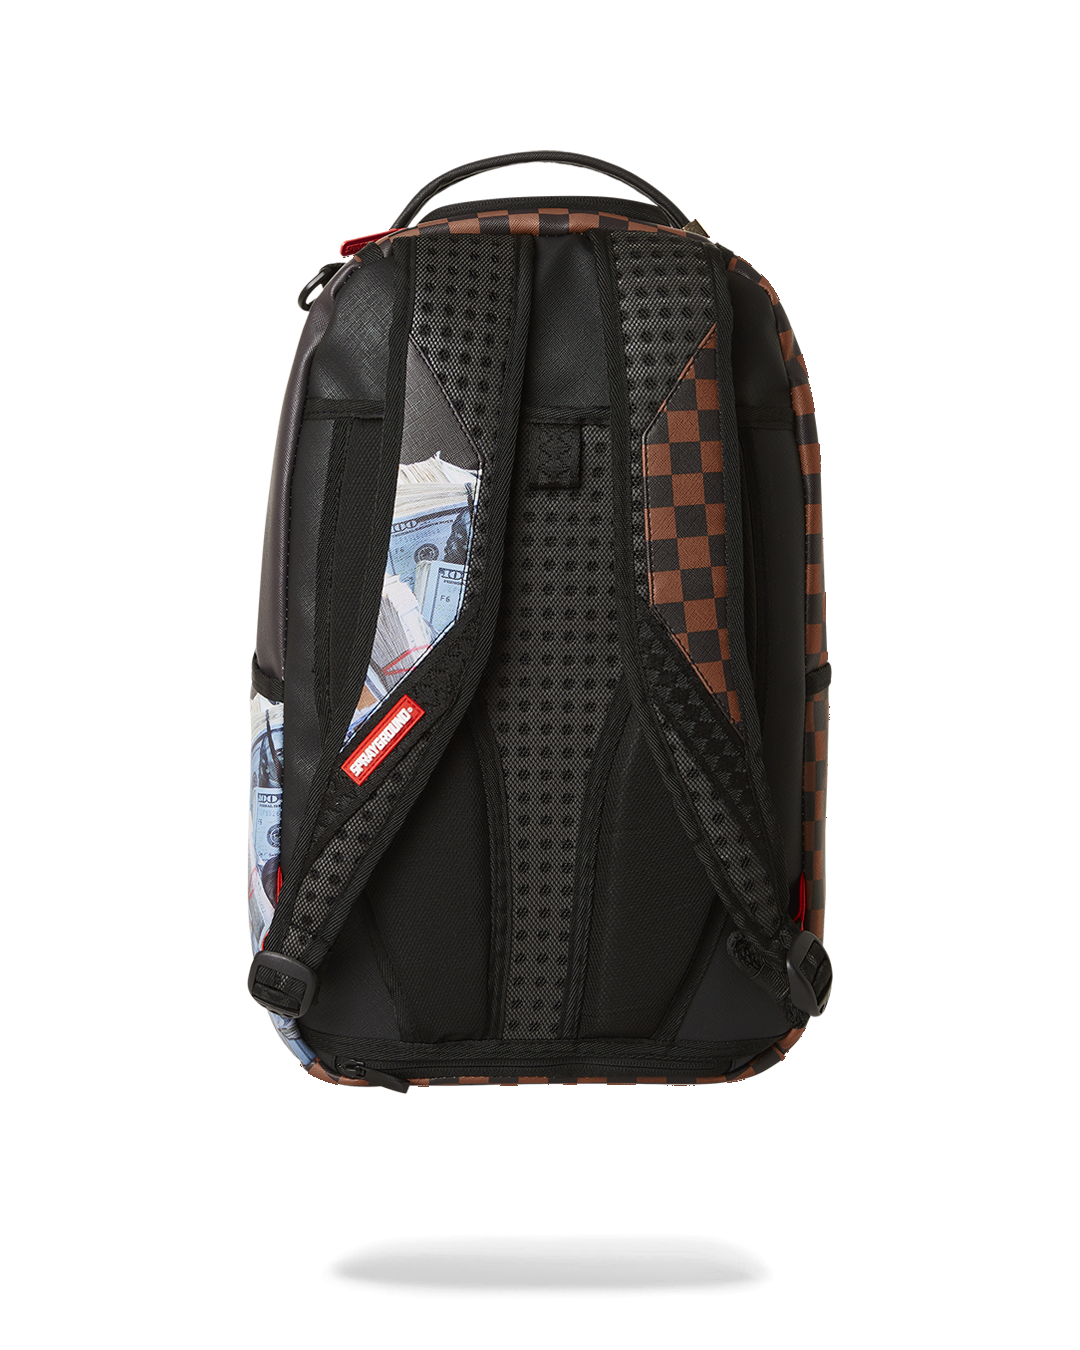 SPRAYGROUND LIMITED EDITION BACKPACK ROLLIN DEEP IN SUCCESS JOURNEY BEGINS  NEW